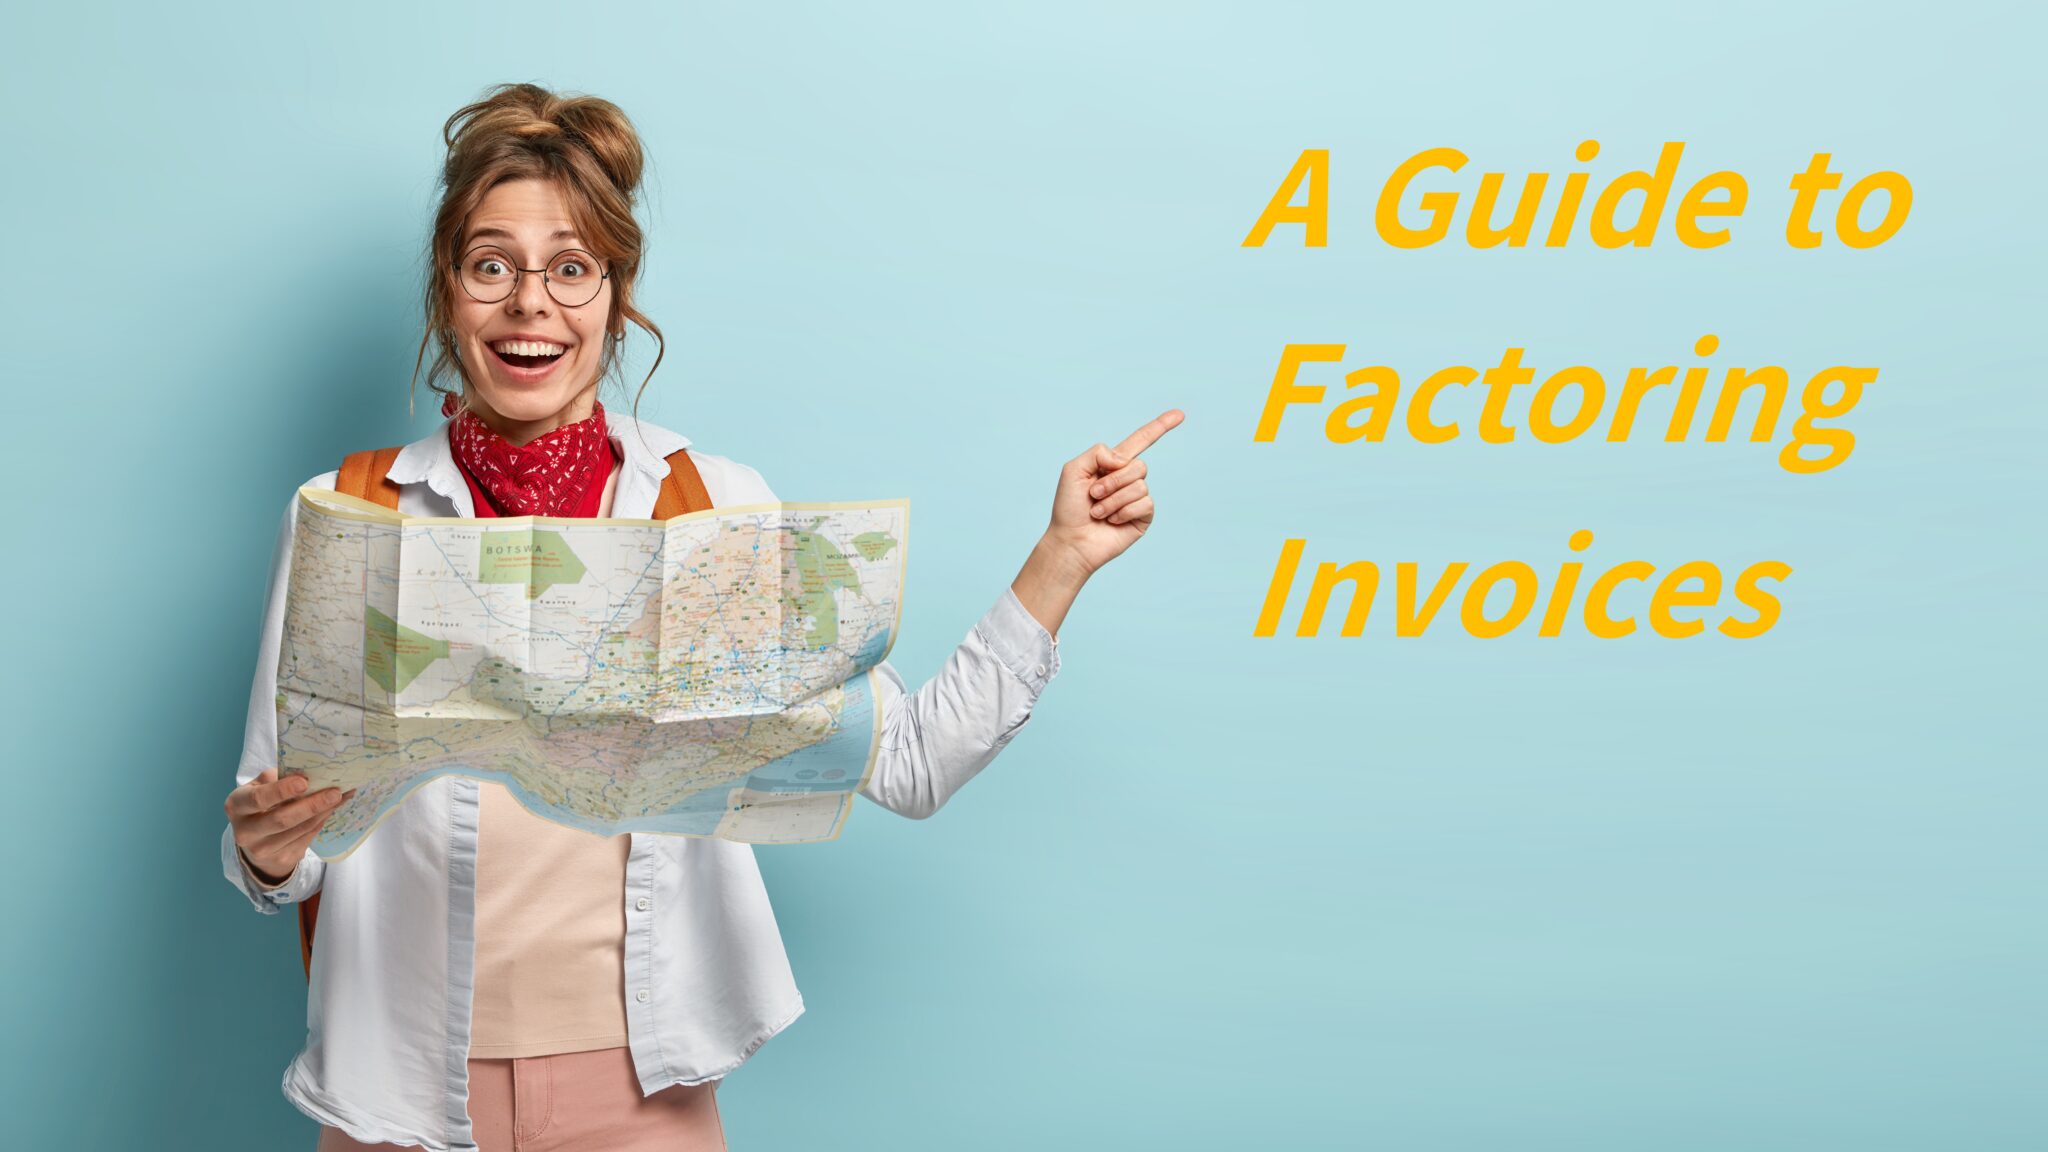 A Guide to Factoring Invoices